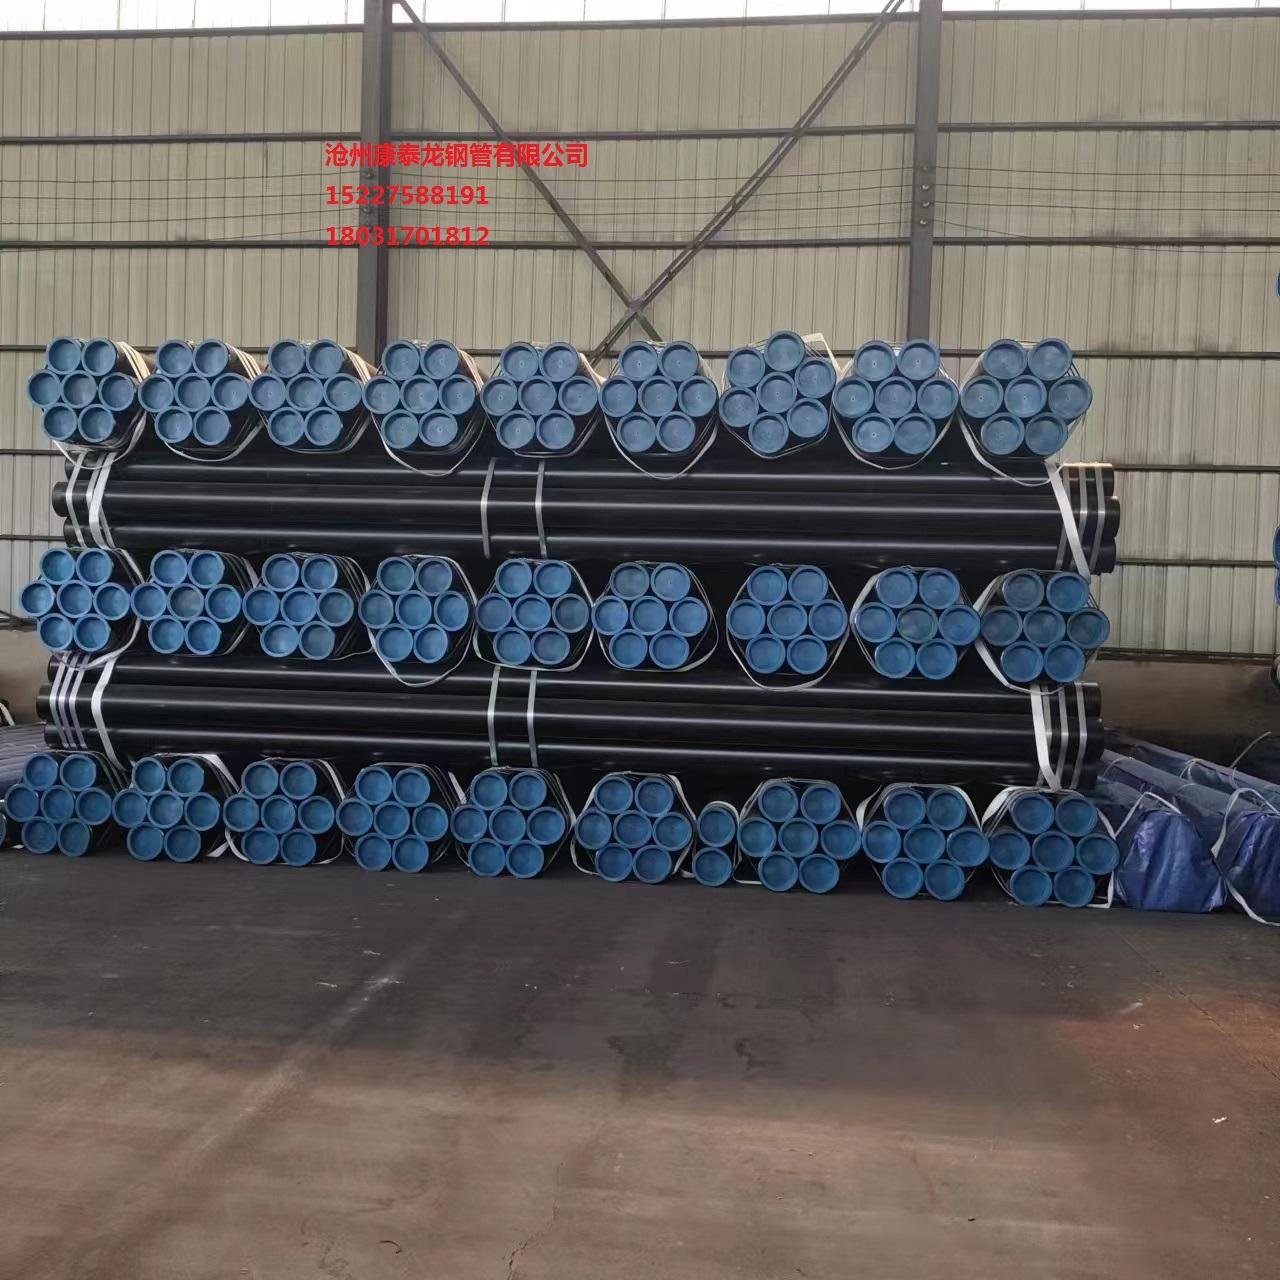 Cangzhou Yulong Steel CoLtd. foreign trade seamless pipe 3